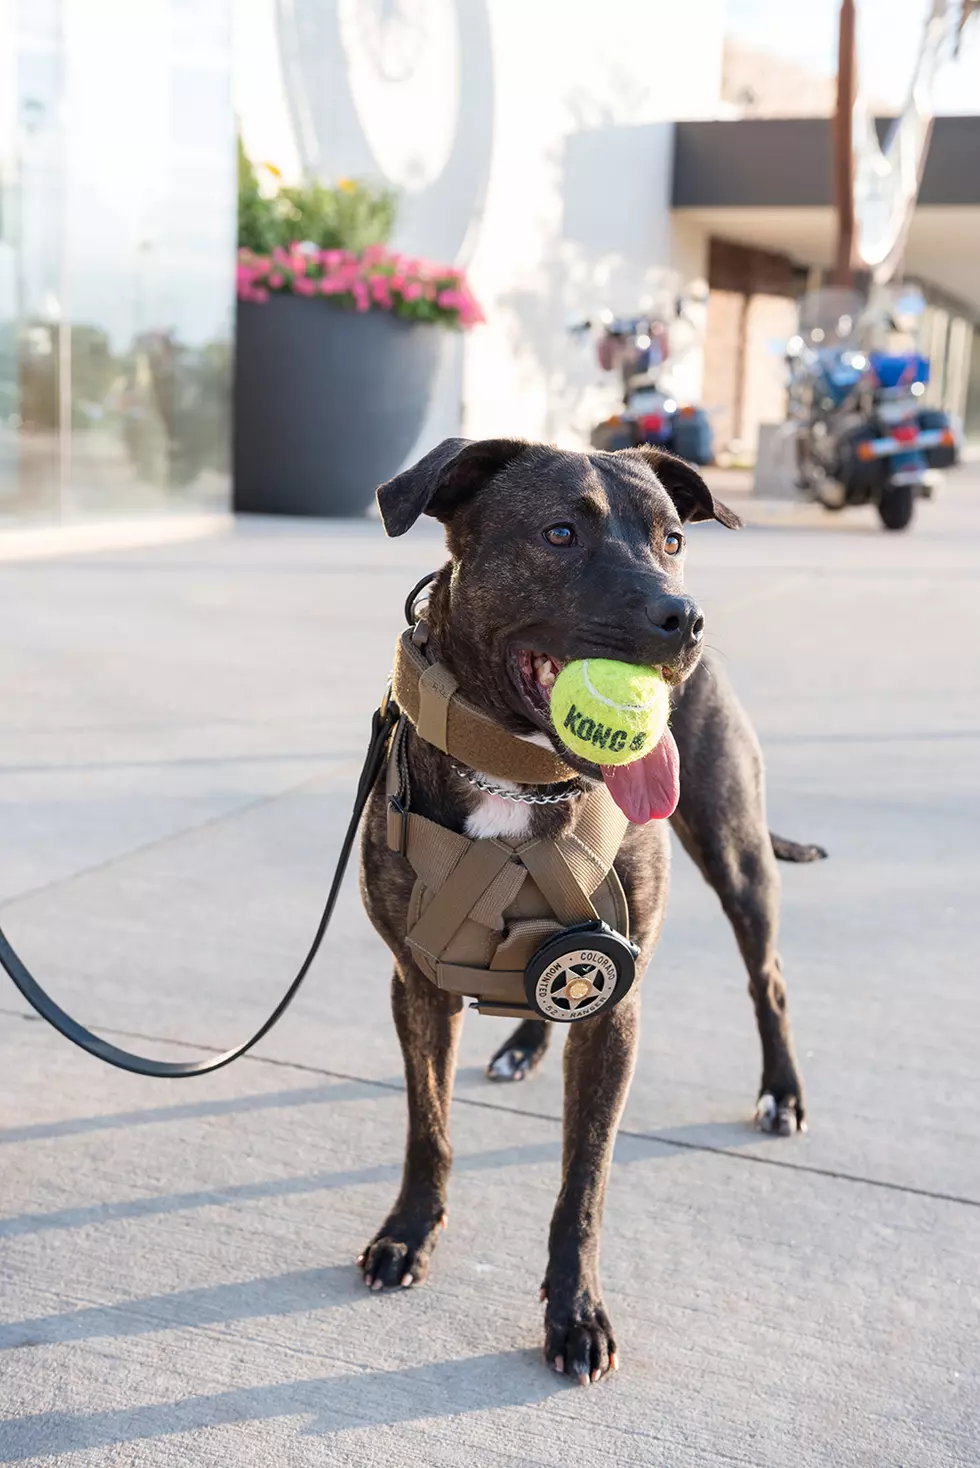 K9 Kara is the First-Ever Pit Bull Narcotics Dog in the State of Colorado